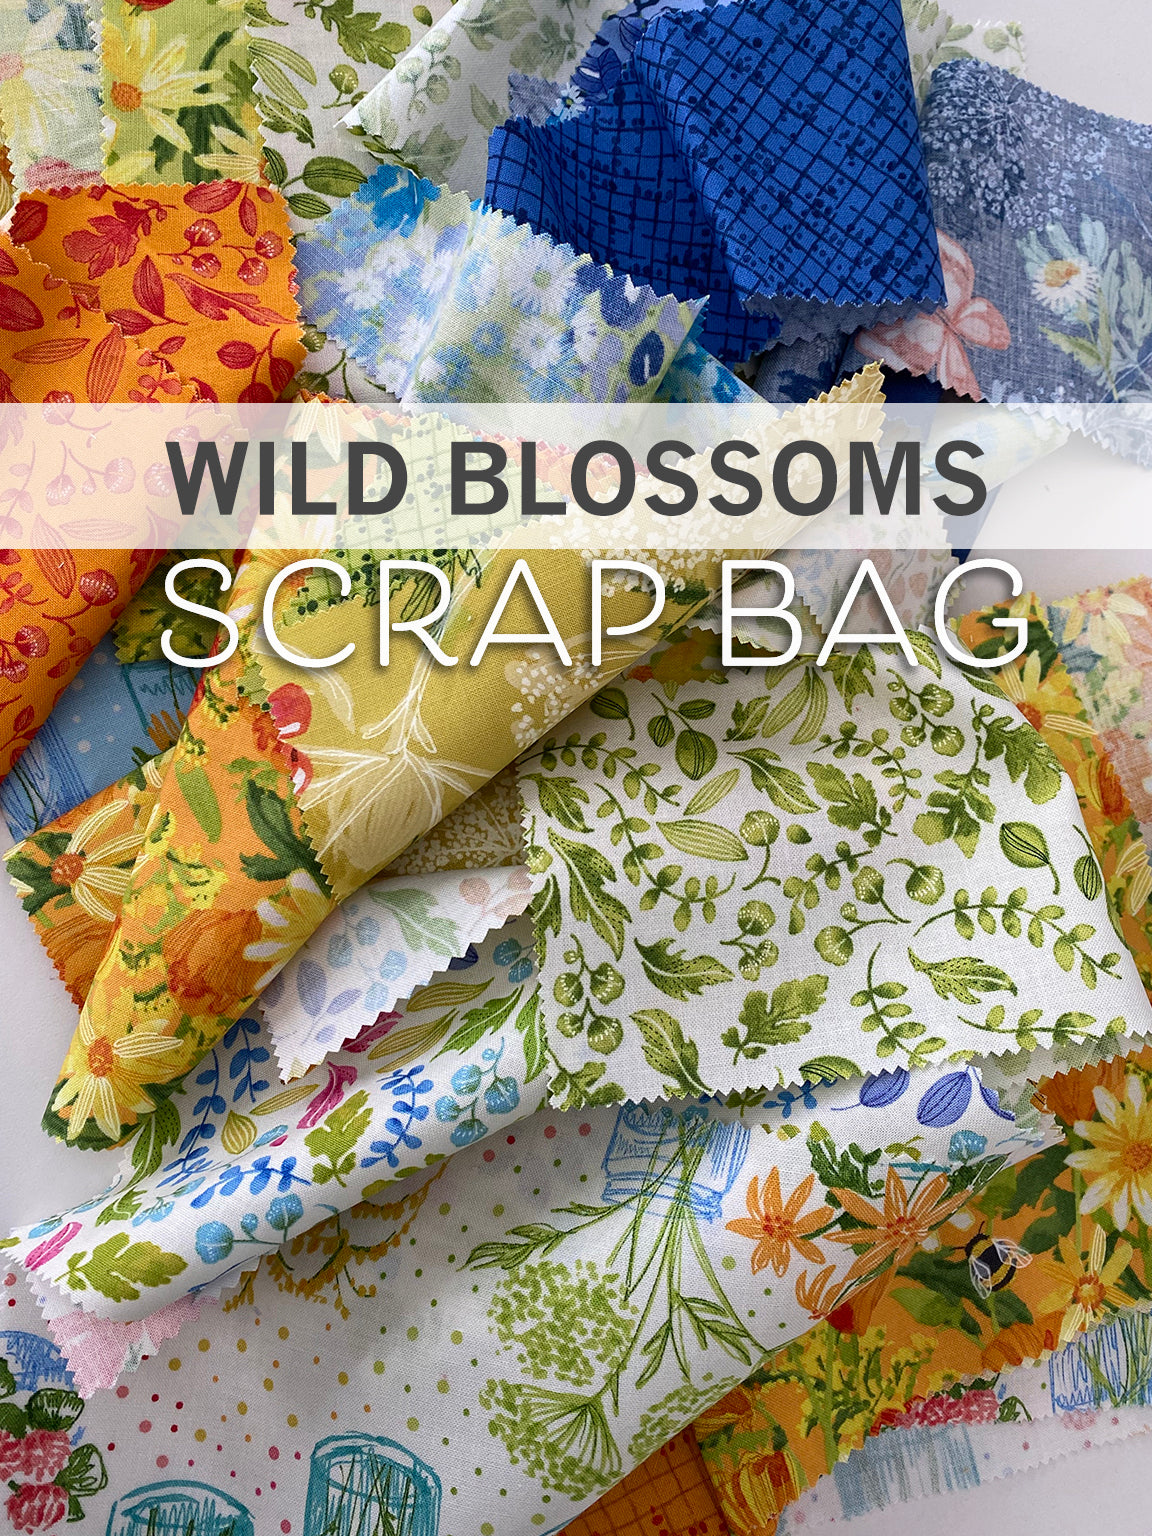 Scrap Bag of WILD BLOSSOMS Quilting Fabric - Moda fabric by Robin Pickens